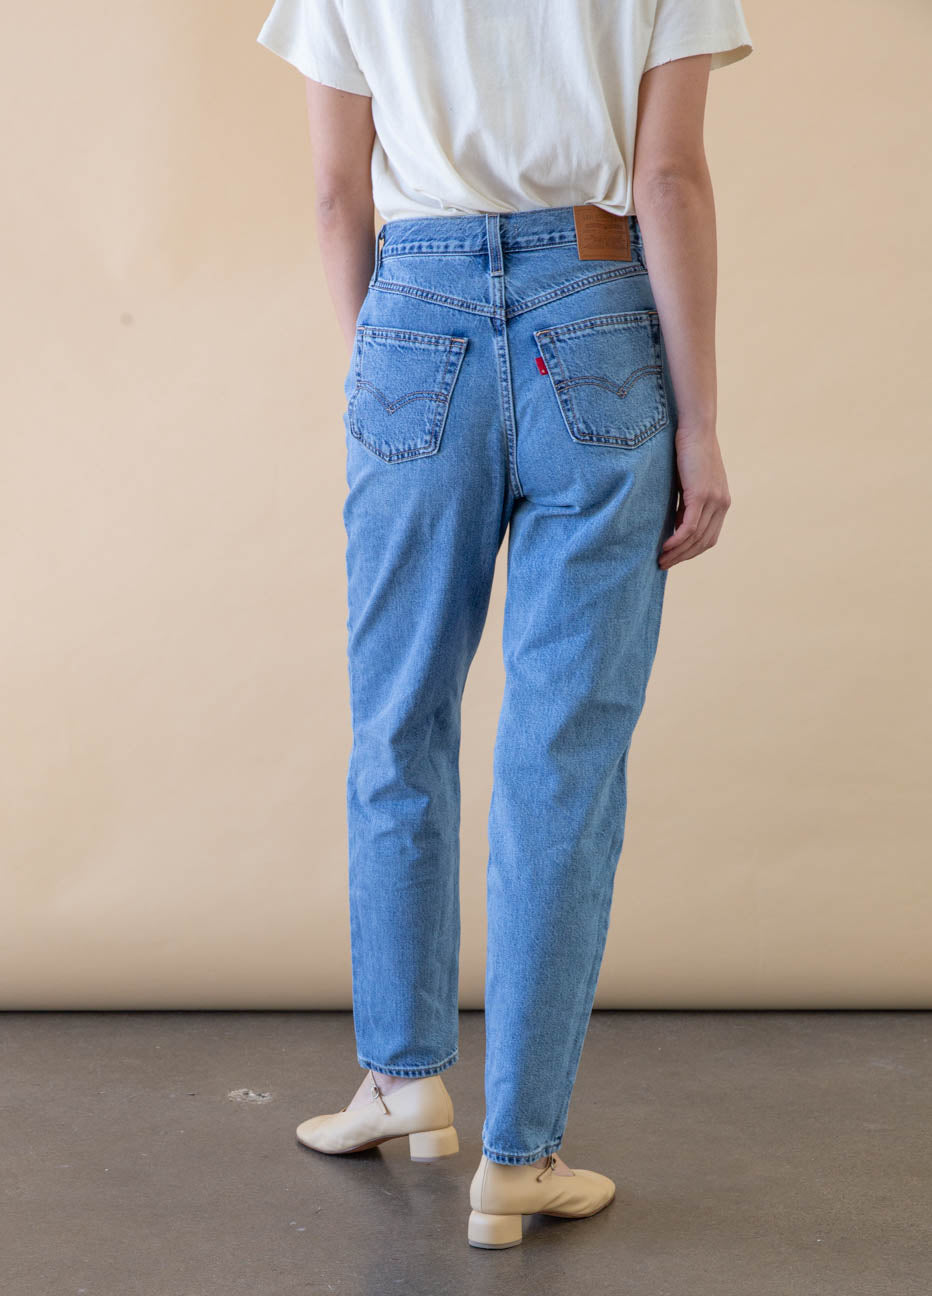 Levis, 80s Mom Jeans, Women, Mom Jeans